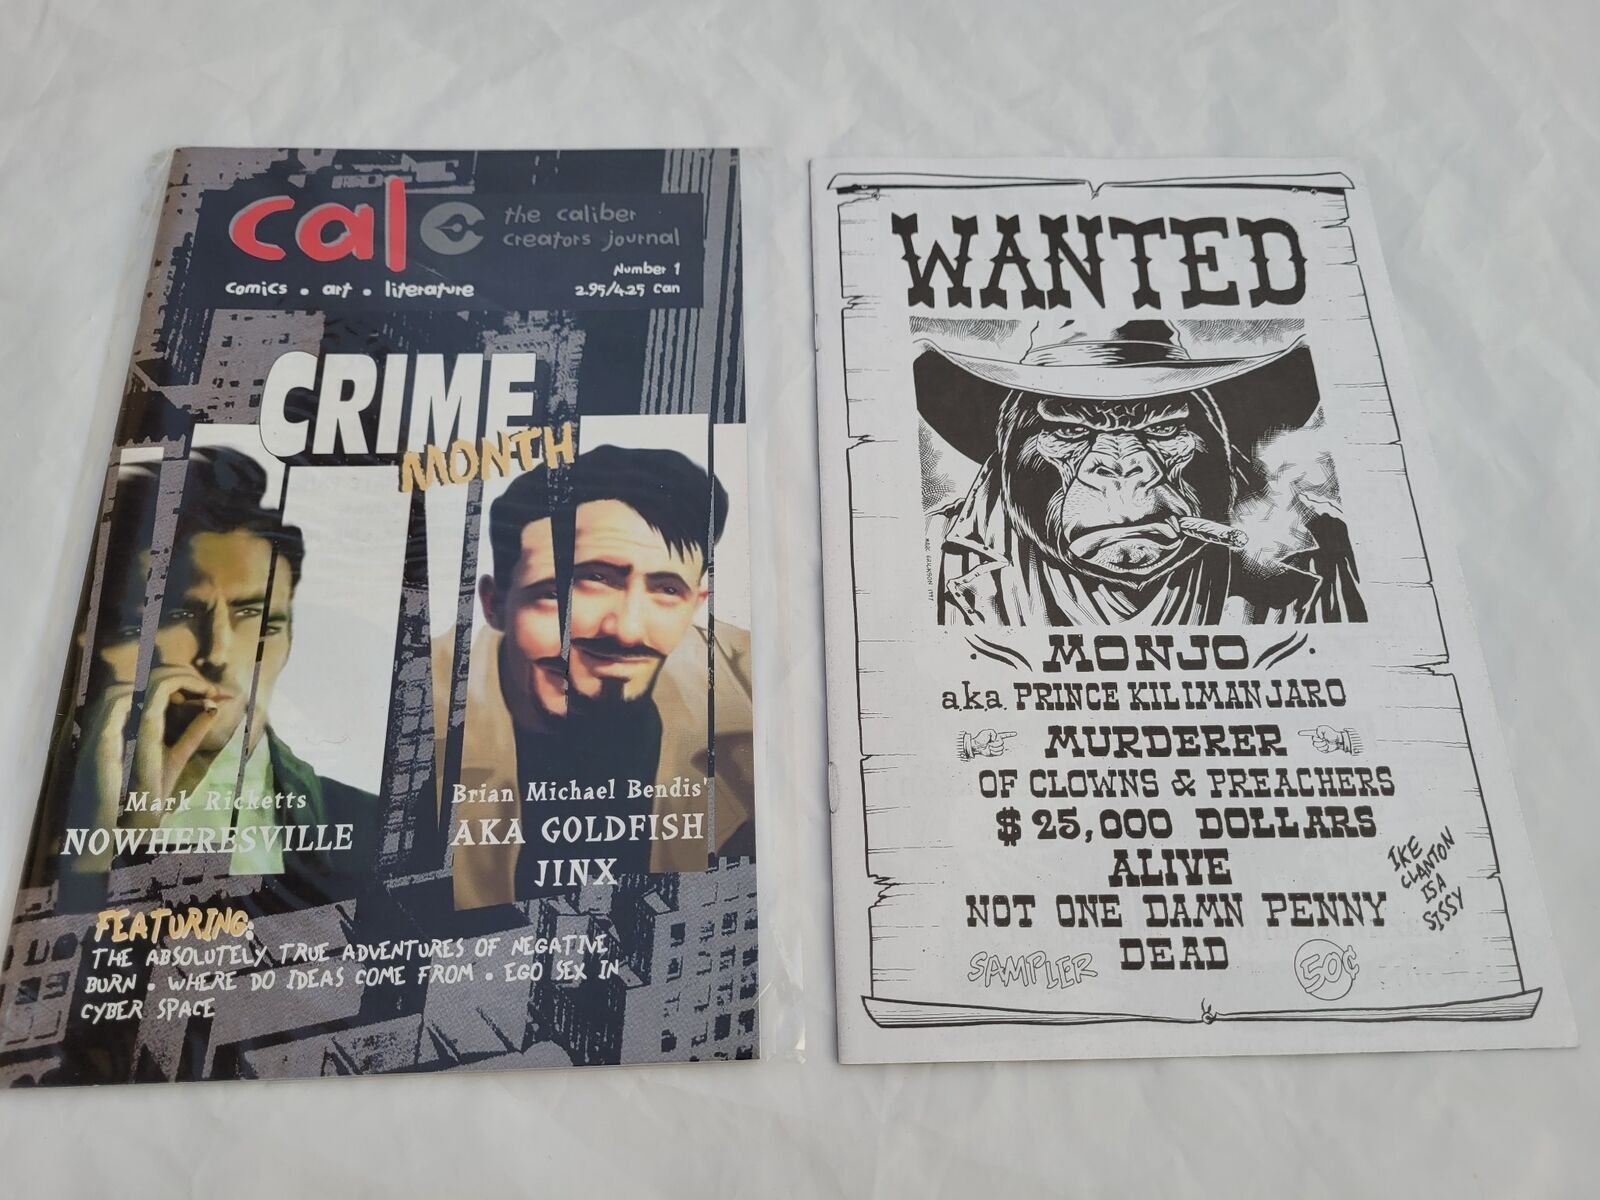 2 Comics Books Wanted Monjo Sampler and Cal Crime Month Journal 1997